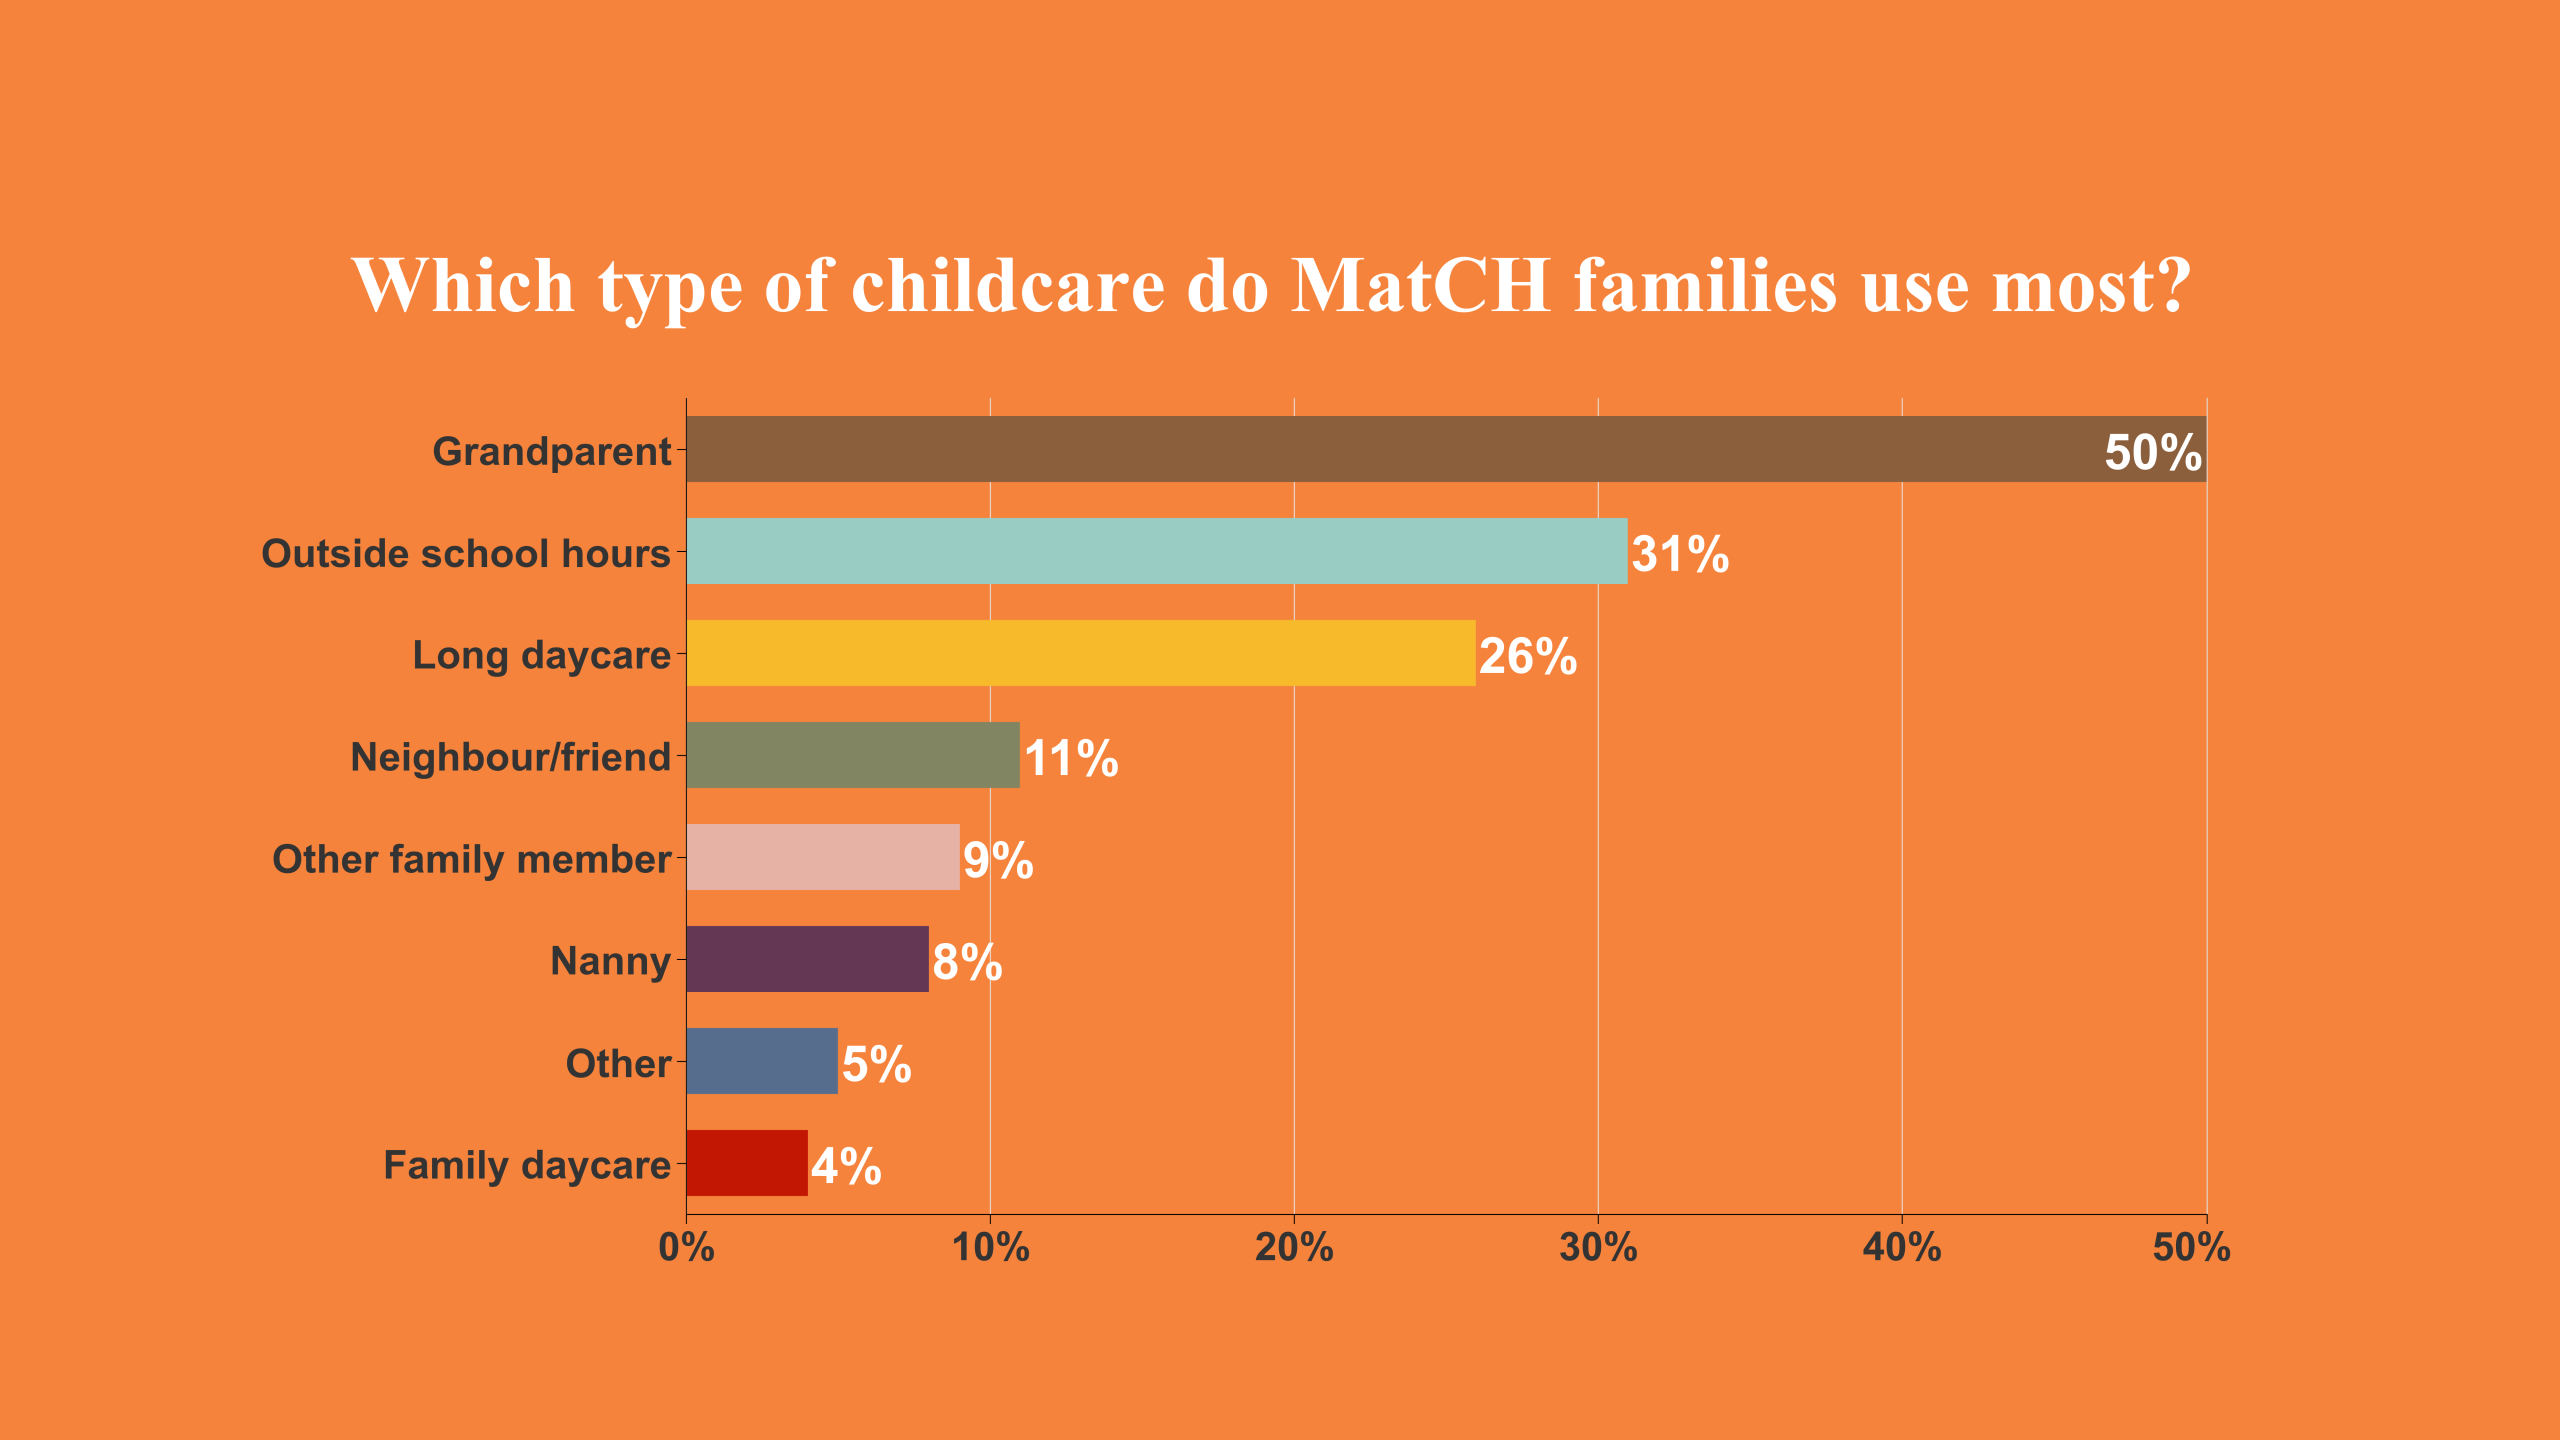 Which types of childcare do MatCH families use most? grandparent - 50%, outside school hours 31%, long daycare 28%, neighbour/friend 11%, other family 9%, nanny 8%, other 5%, family daycare 4%